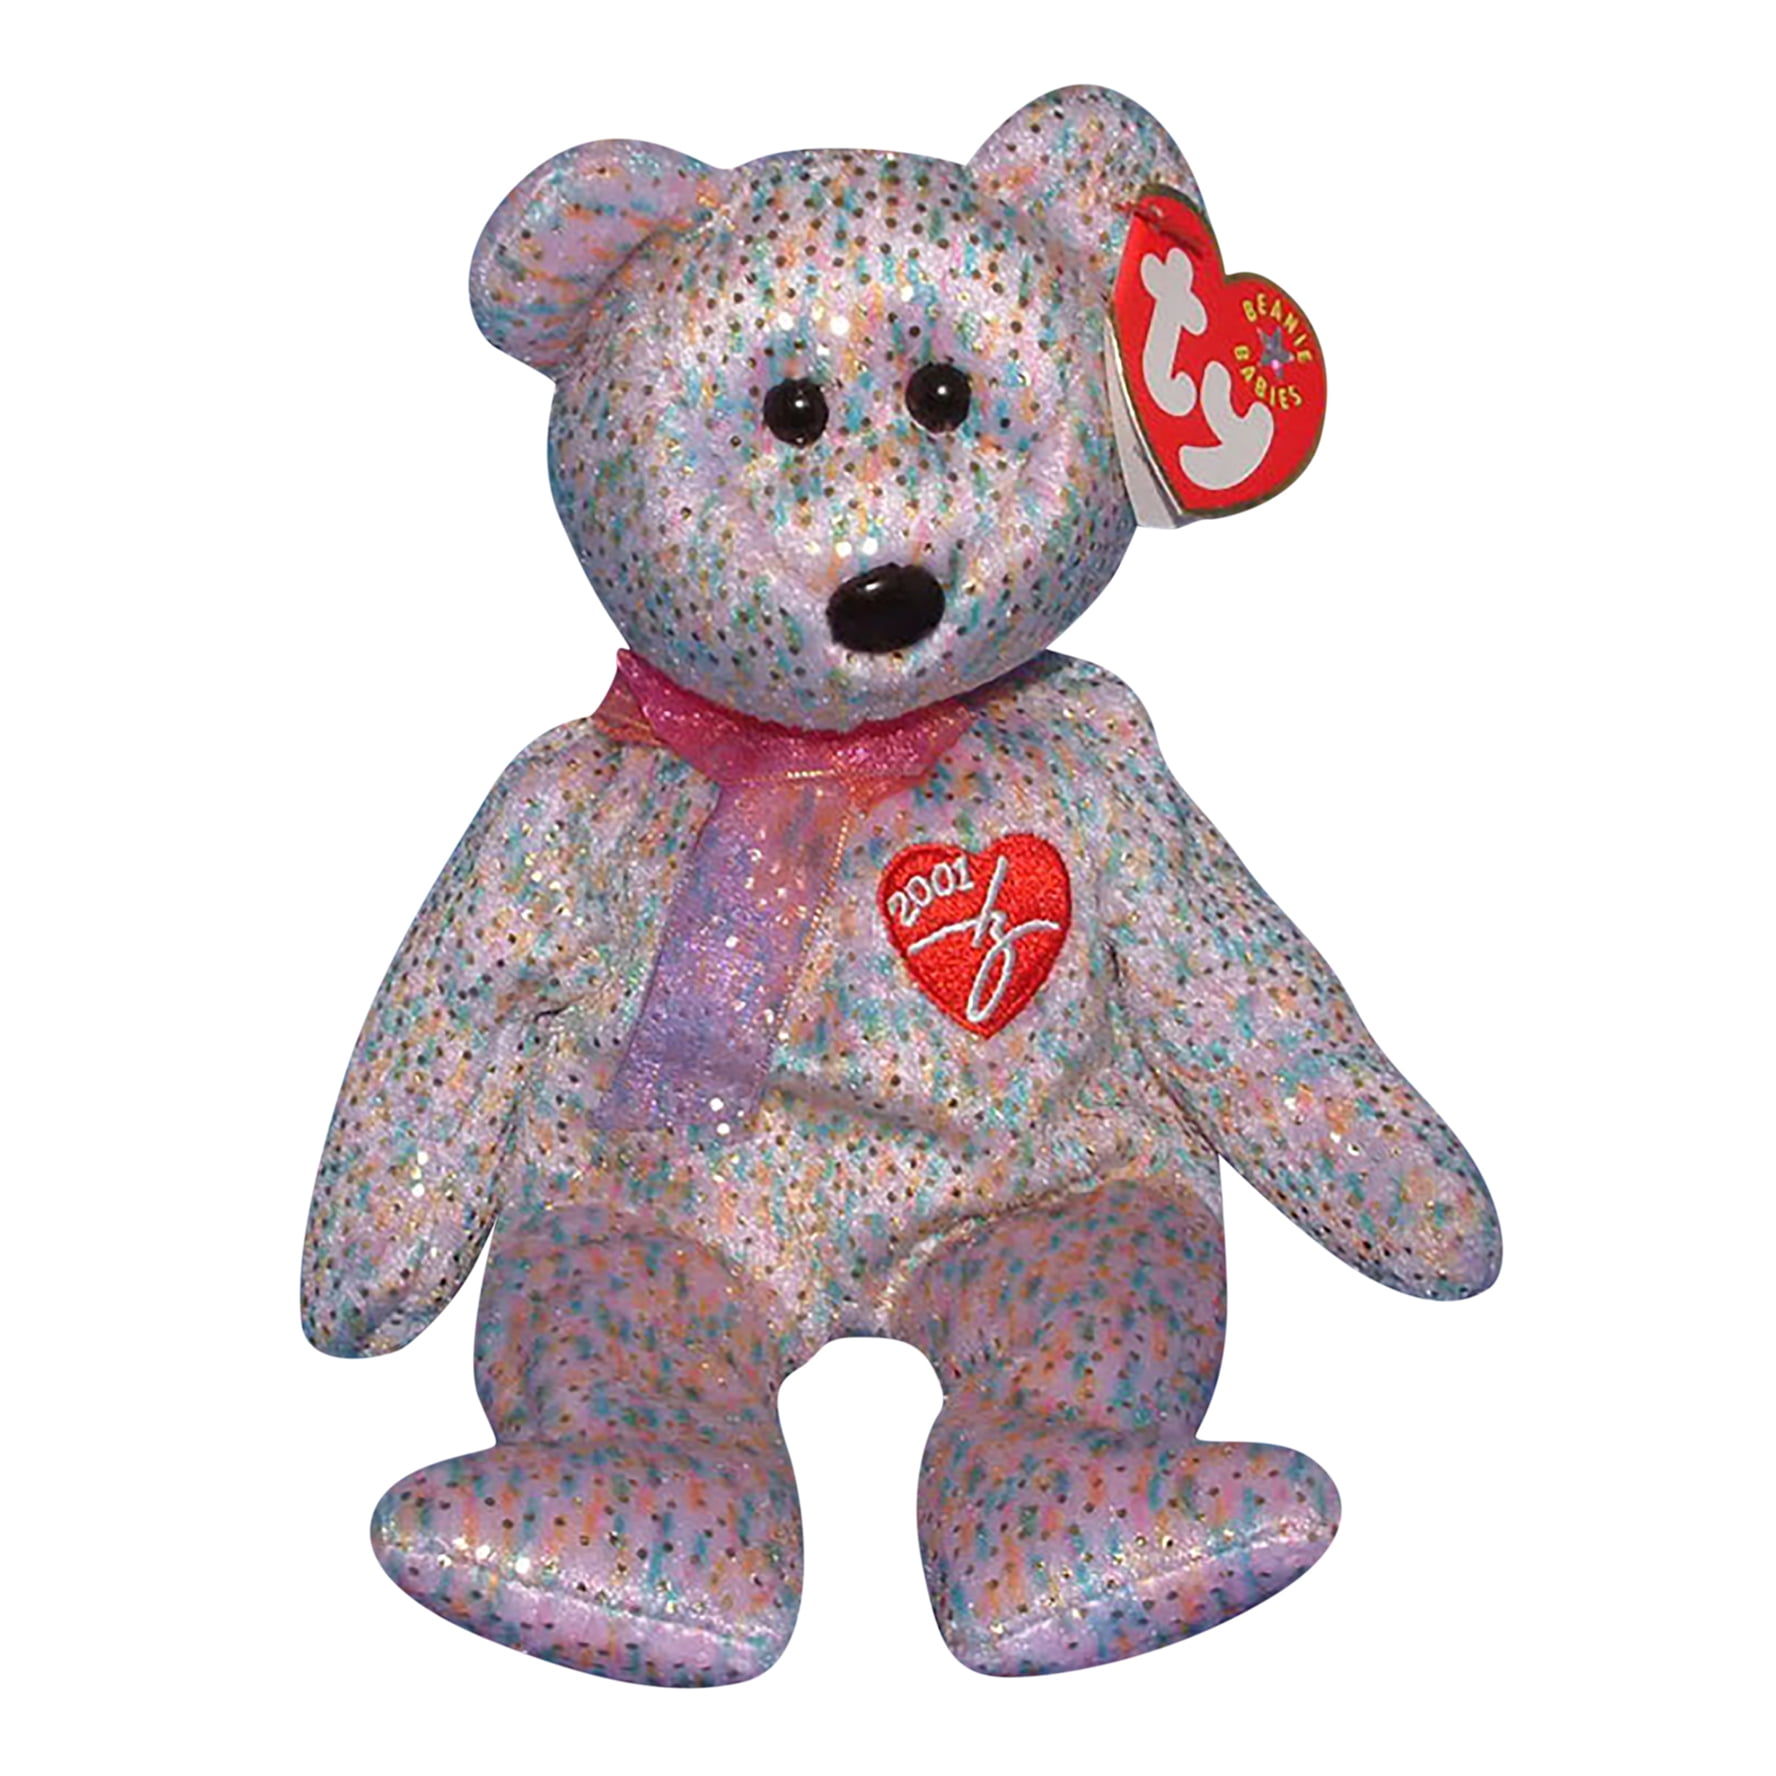 Ty Beanie Baby Pops 2001 10th Generation Hang Tag for sale online 